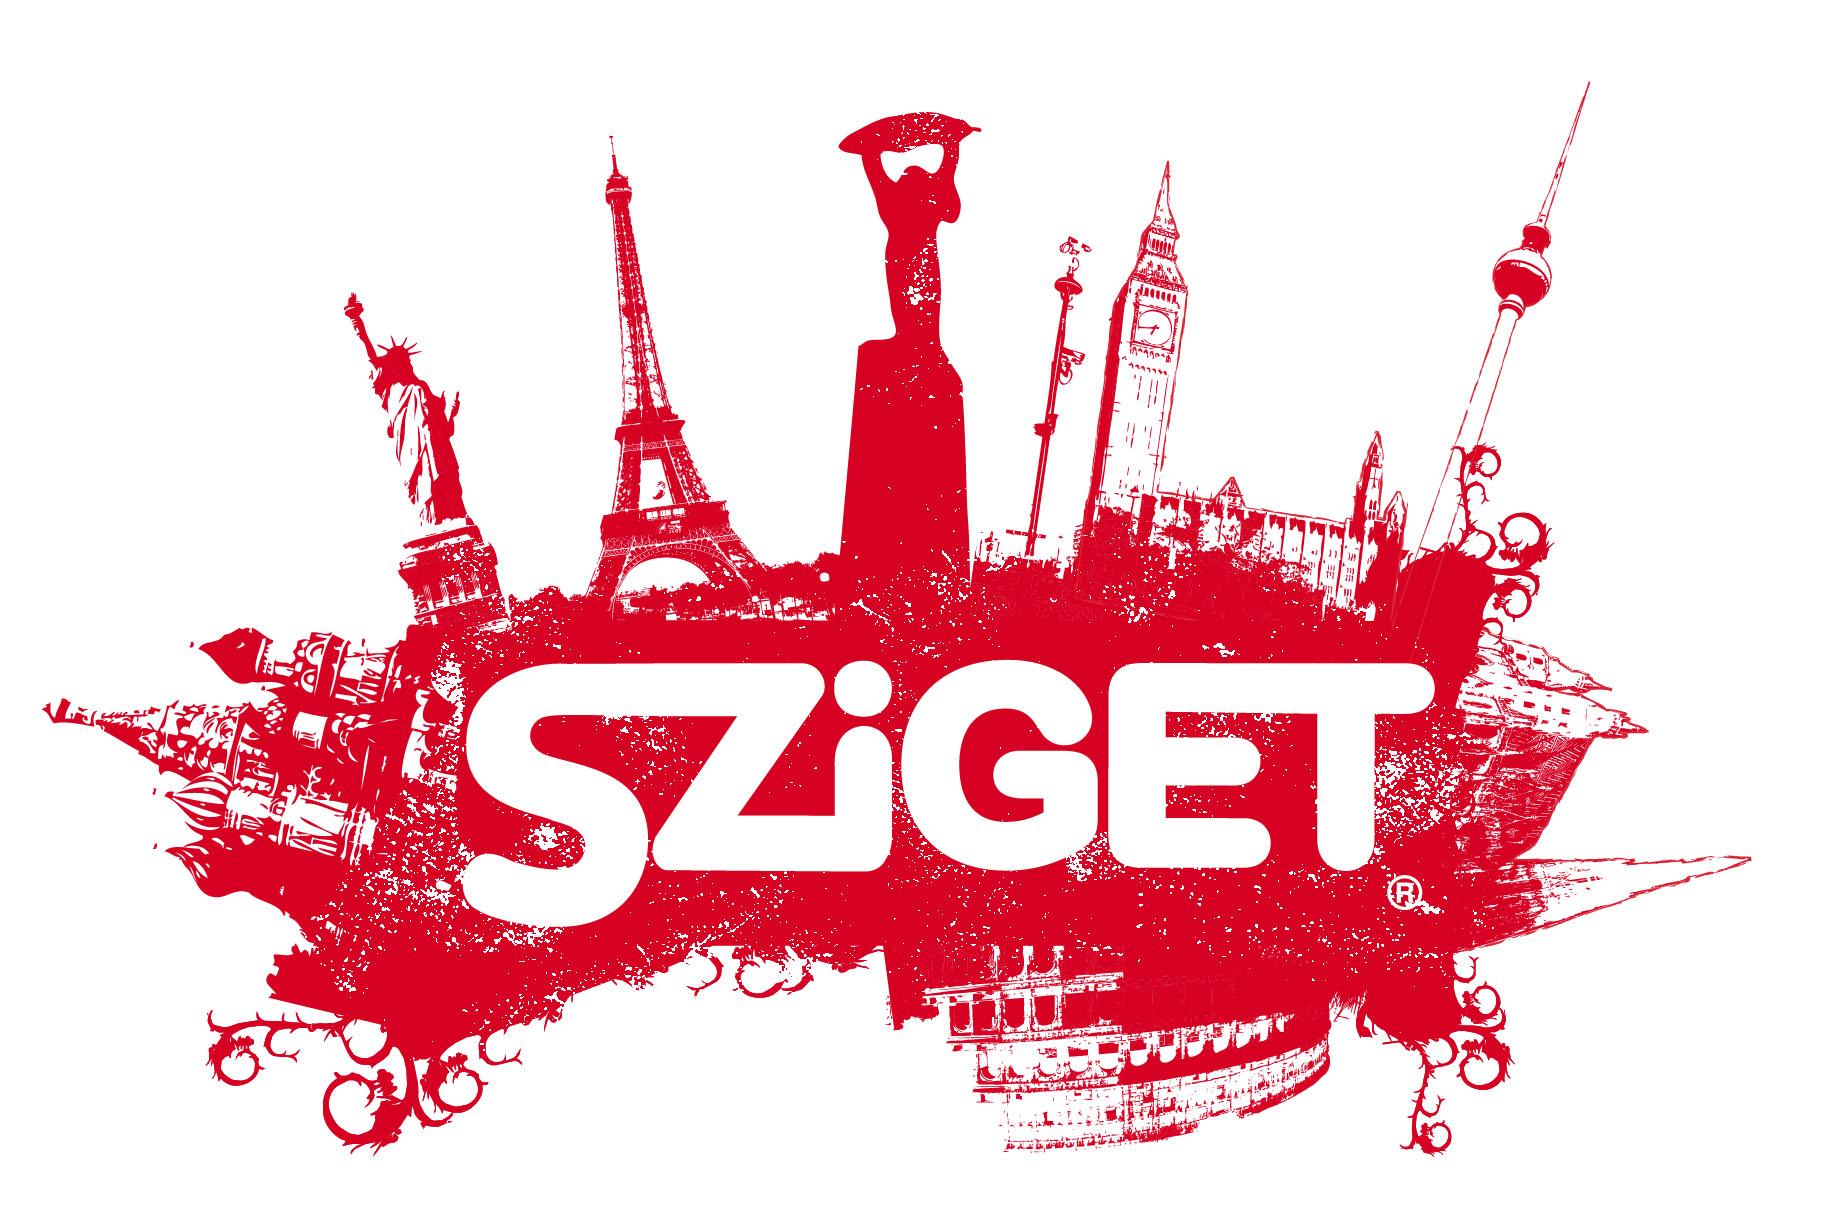 Sign Language Teaching App “Jeles” To Make Debut At The Sziget Festival Budapest